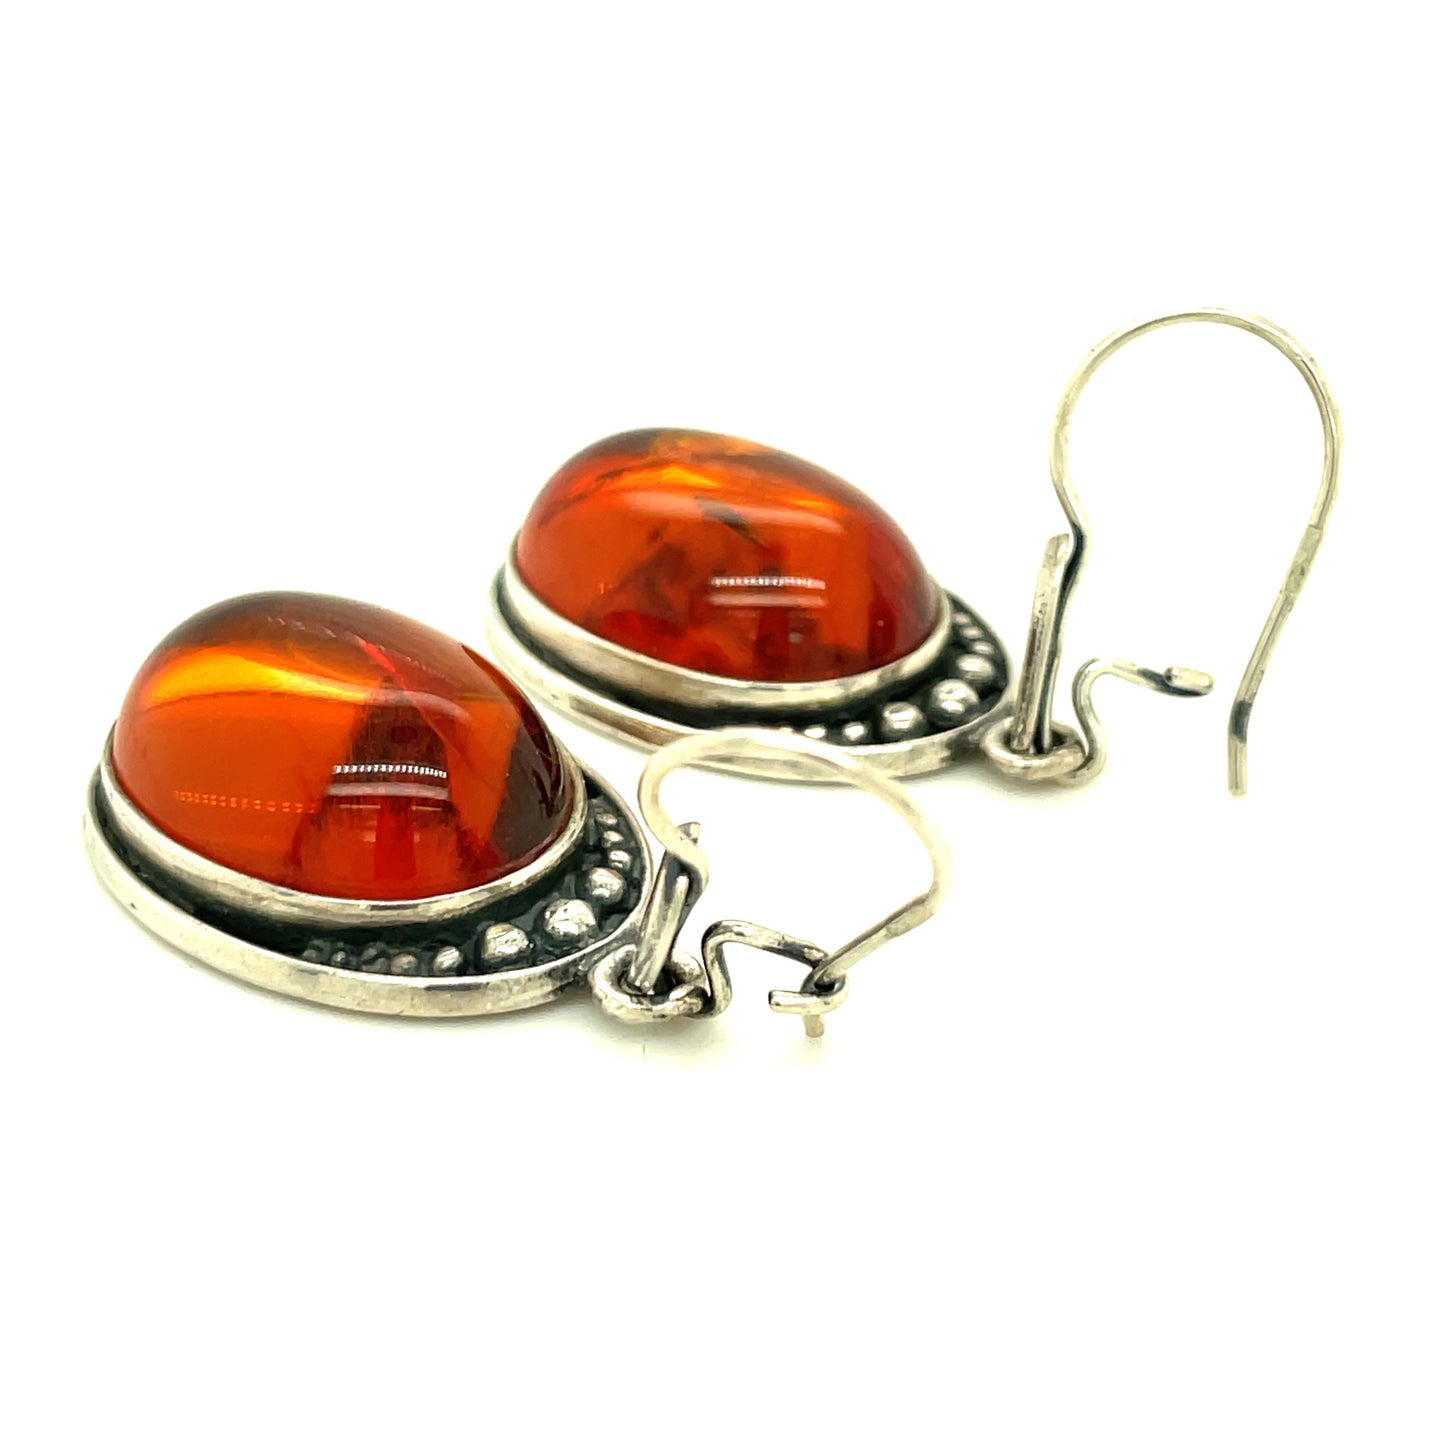 Vintage Sterling Silver and Amber Earrings